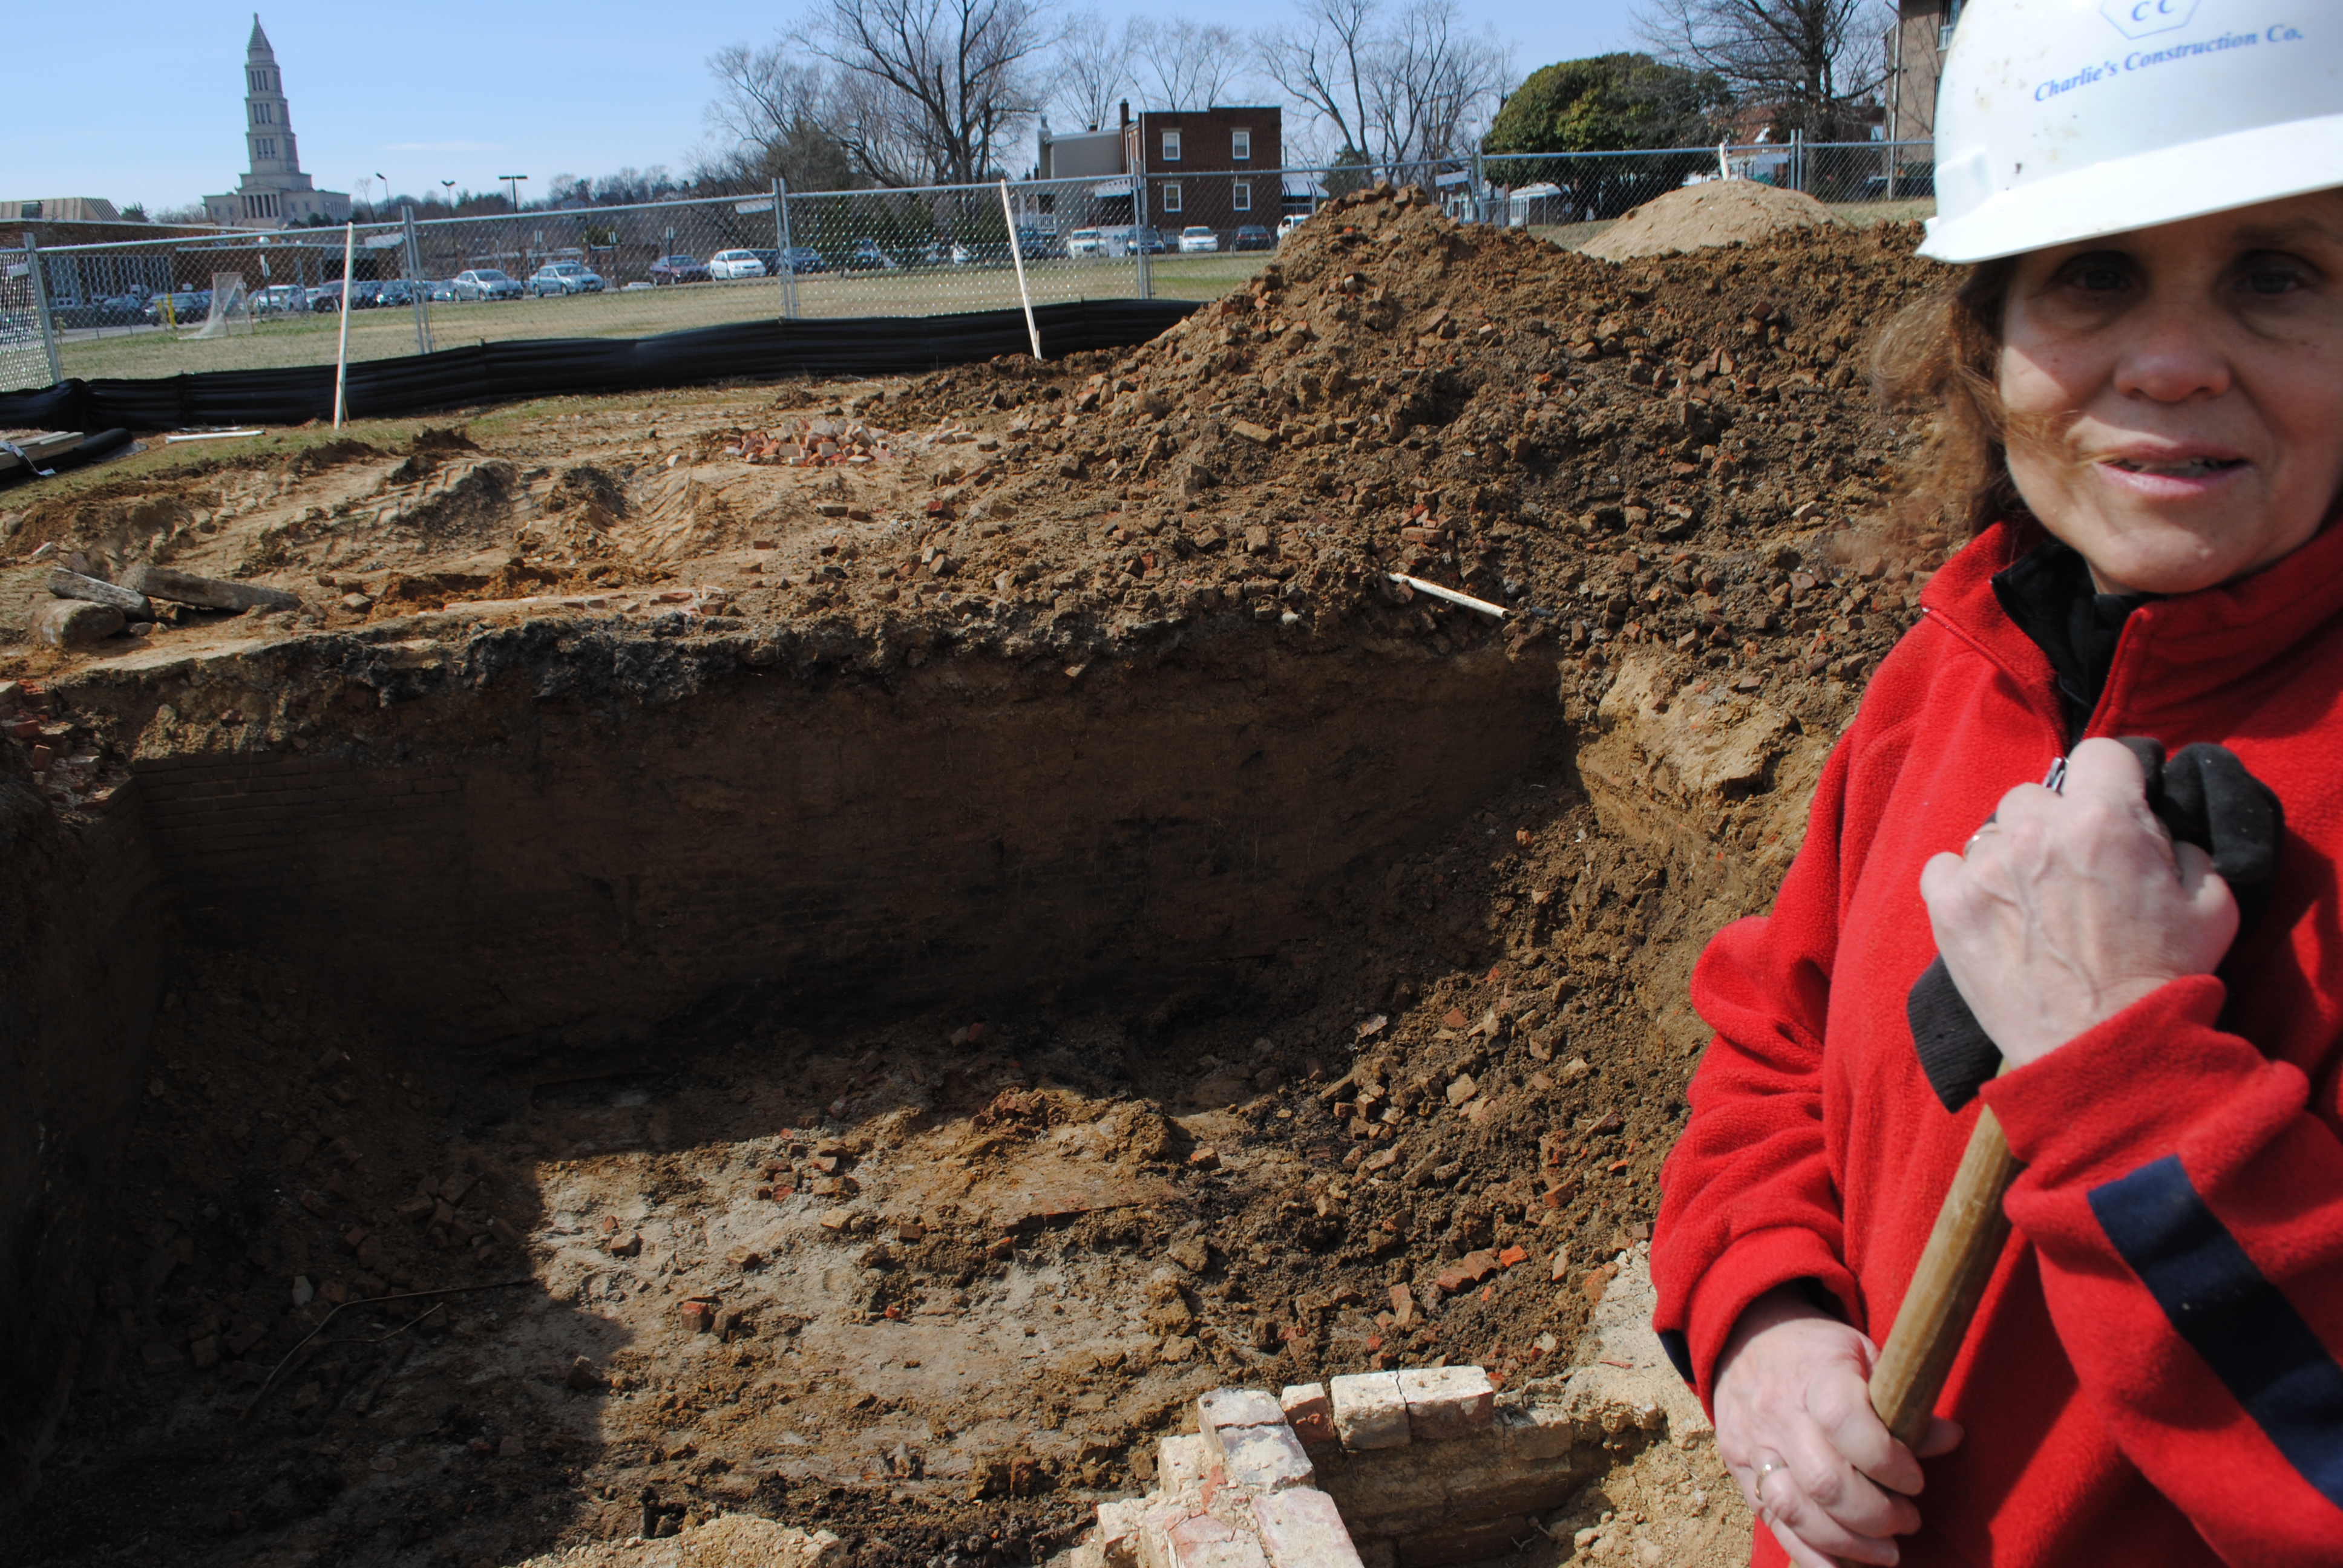 Alexandria archaeologists dig up possible slaughterhouse